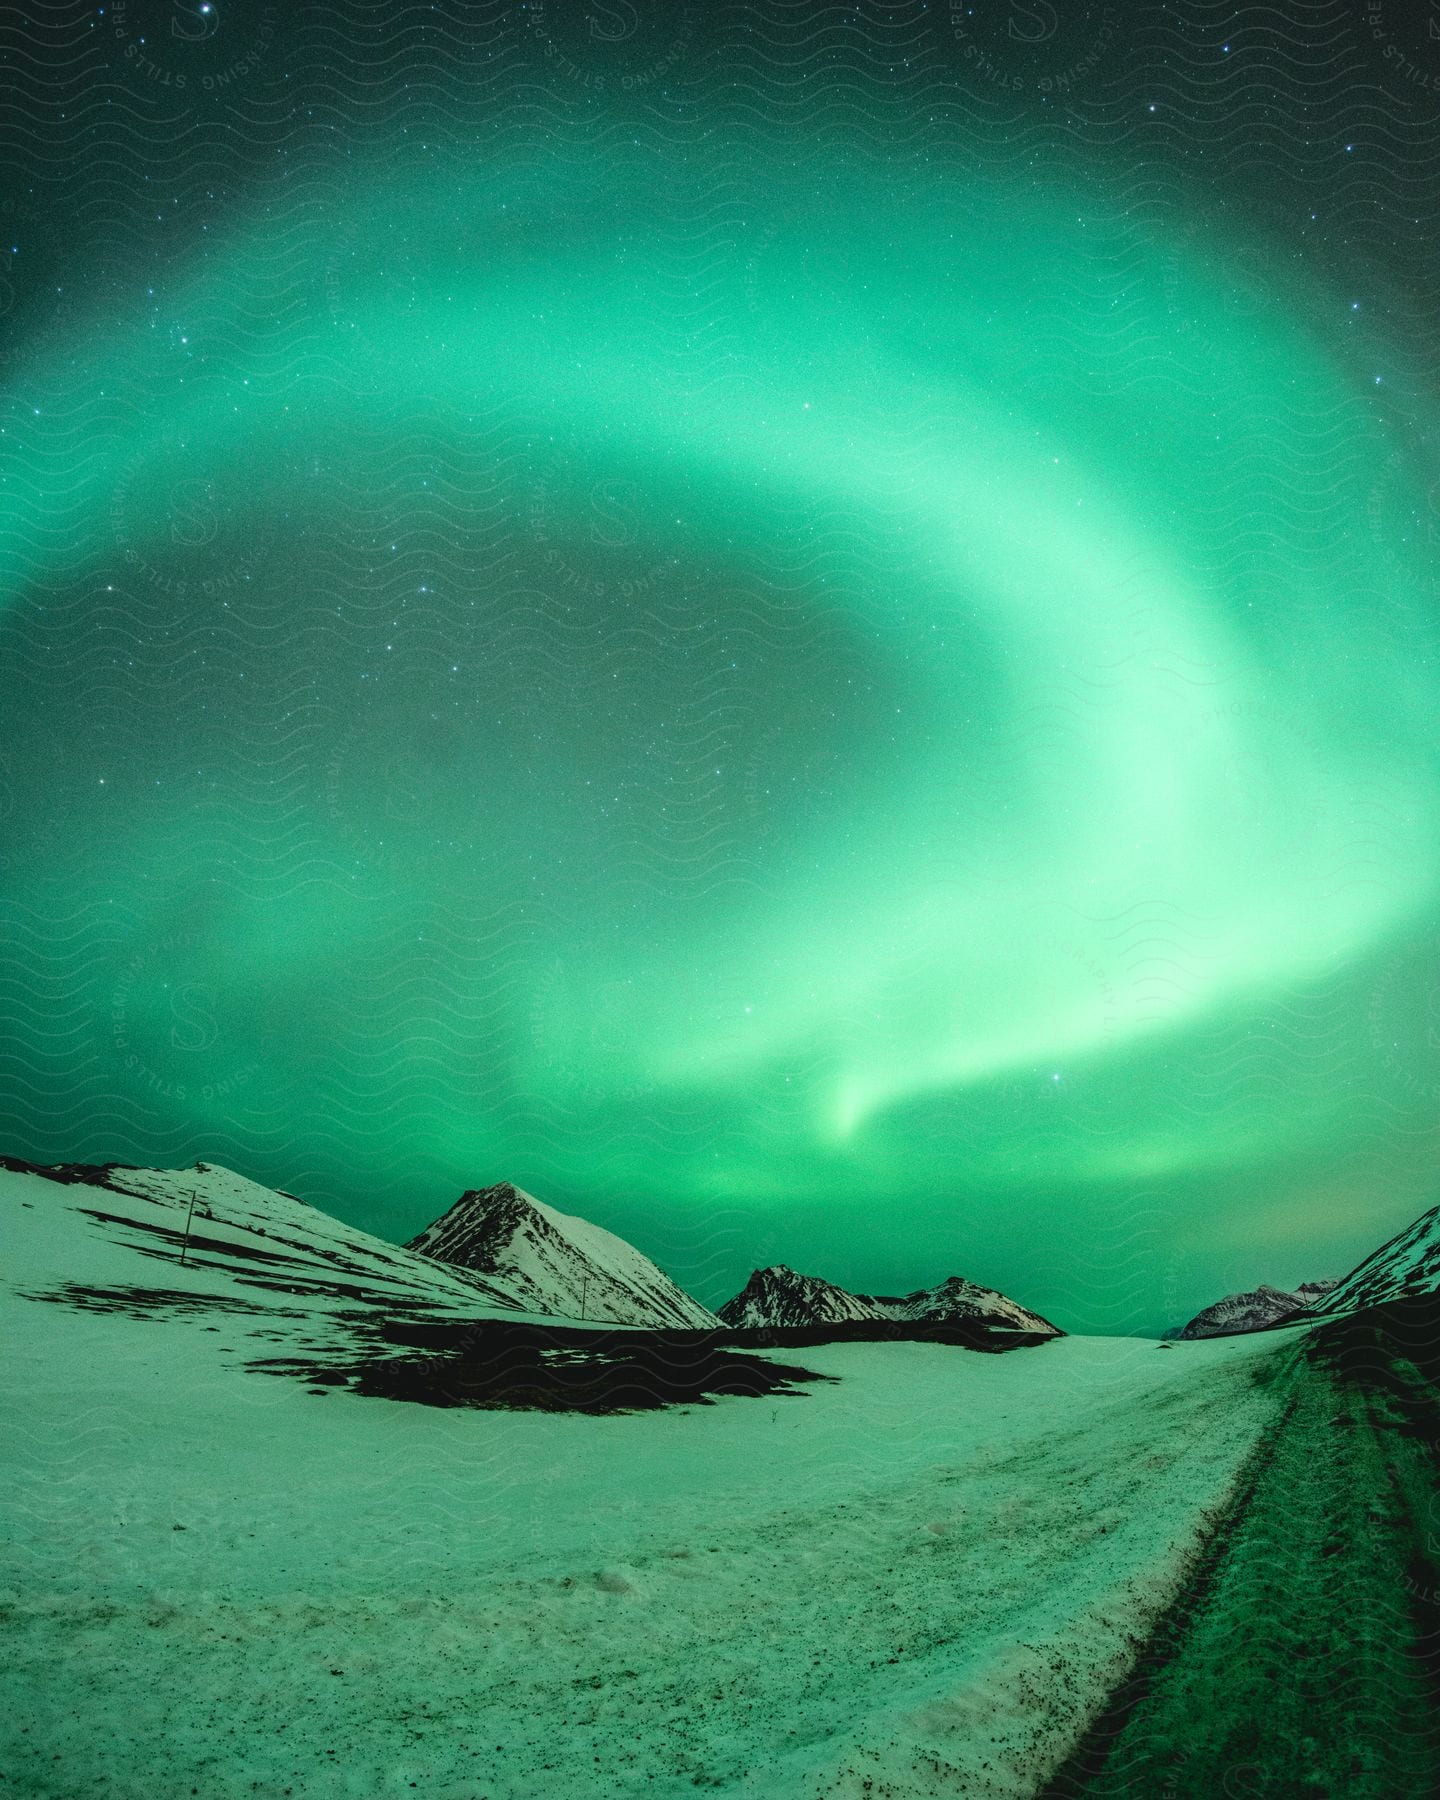 The night sky is filled with the bright green light of the aurora borealis above a snow covered landscape.